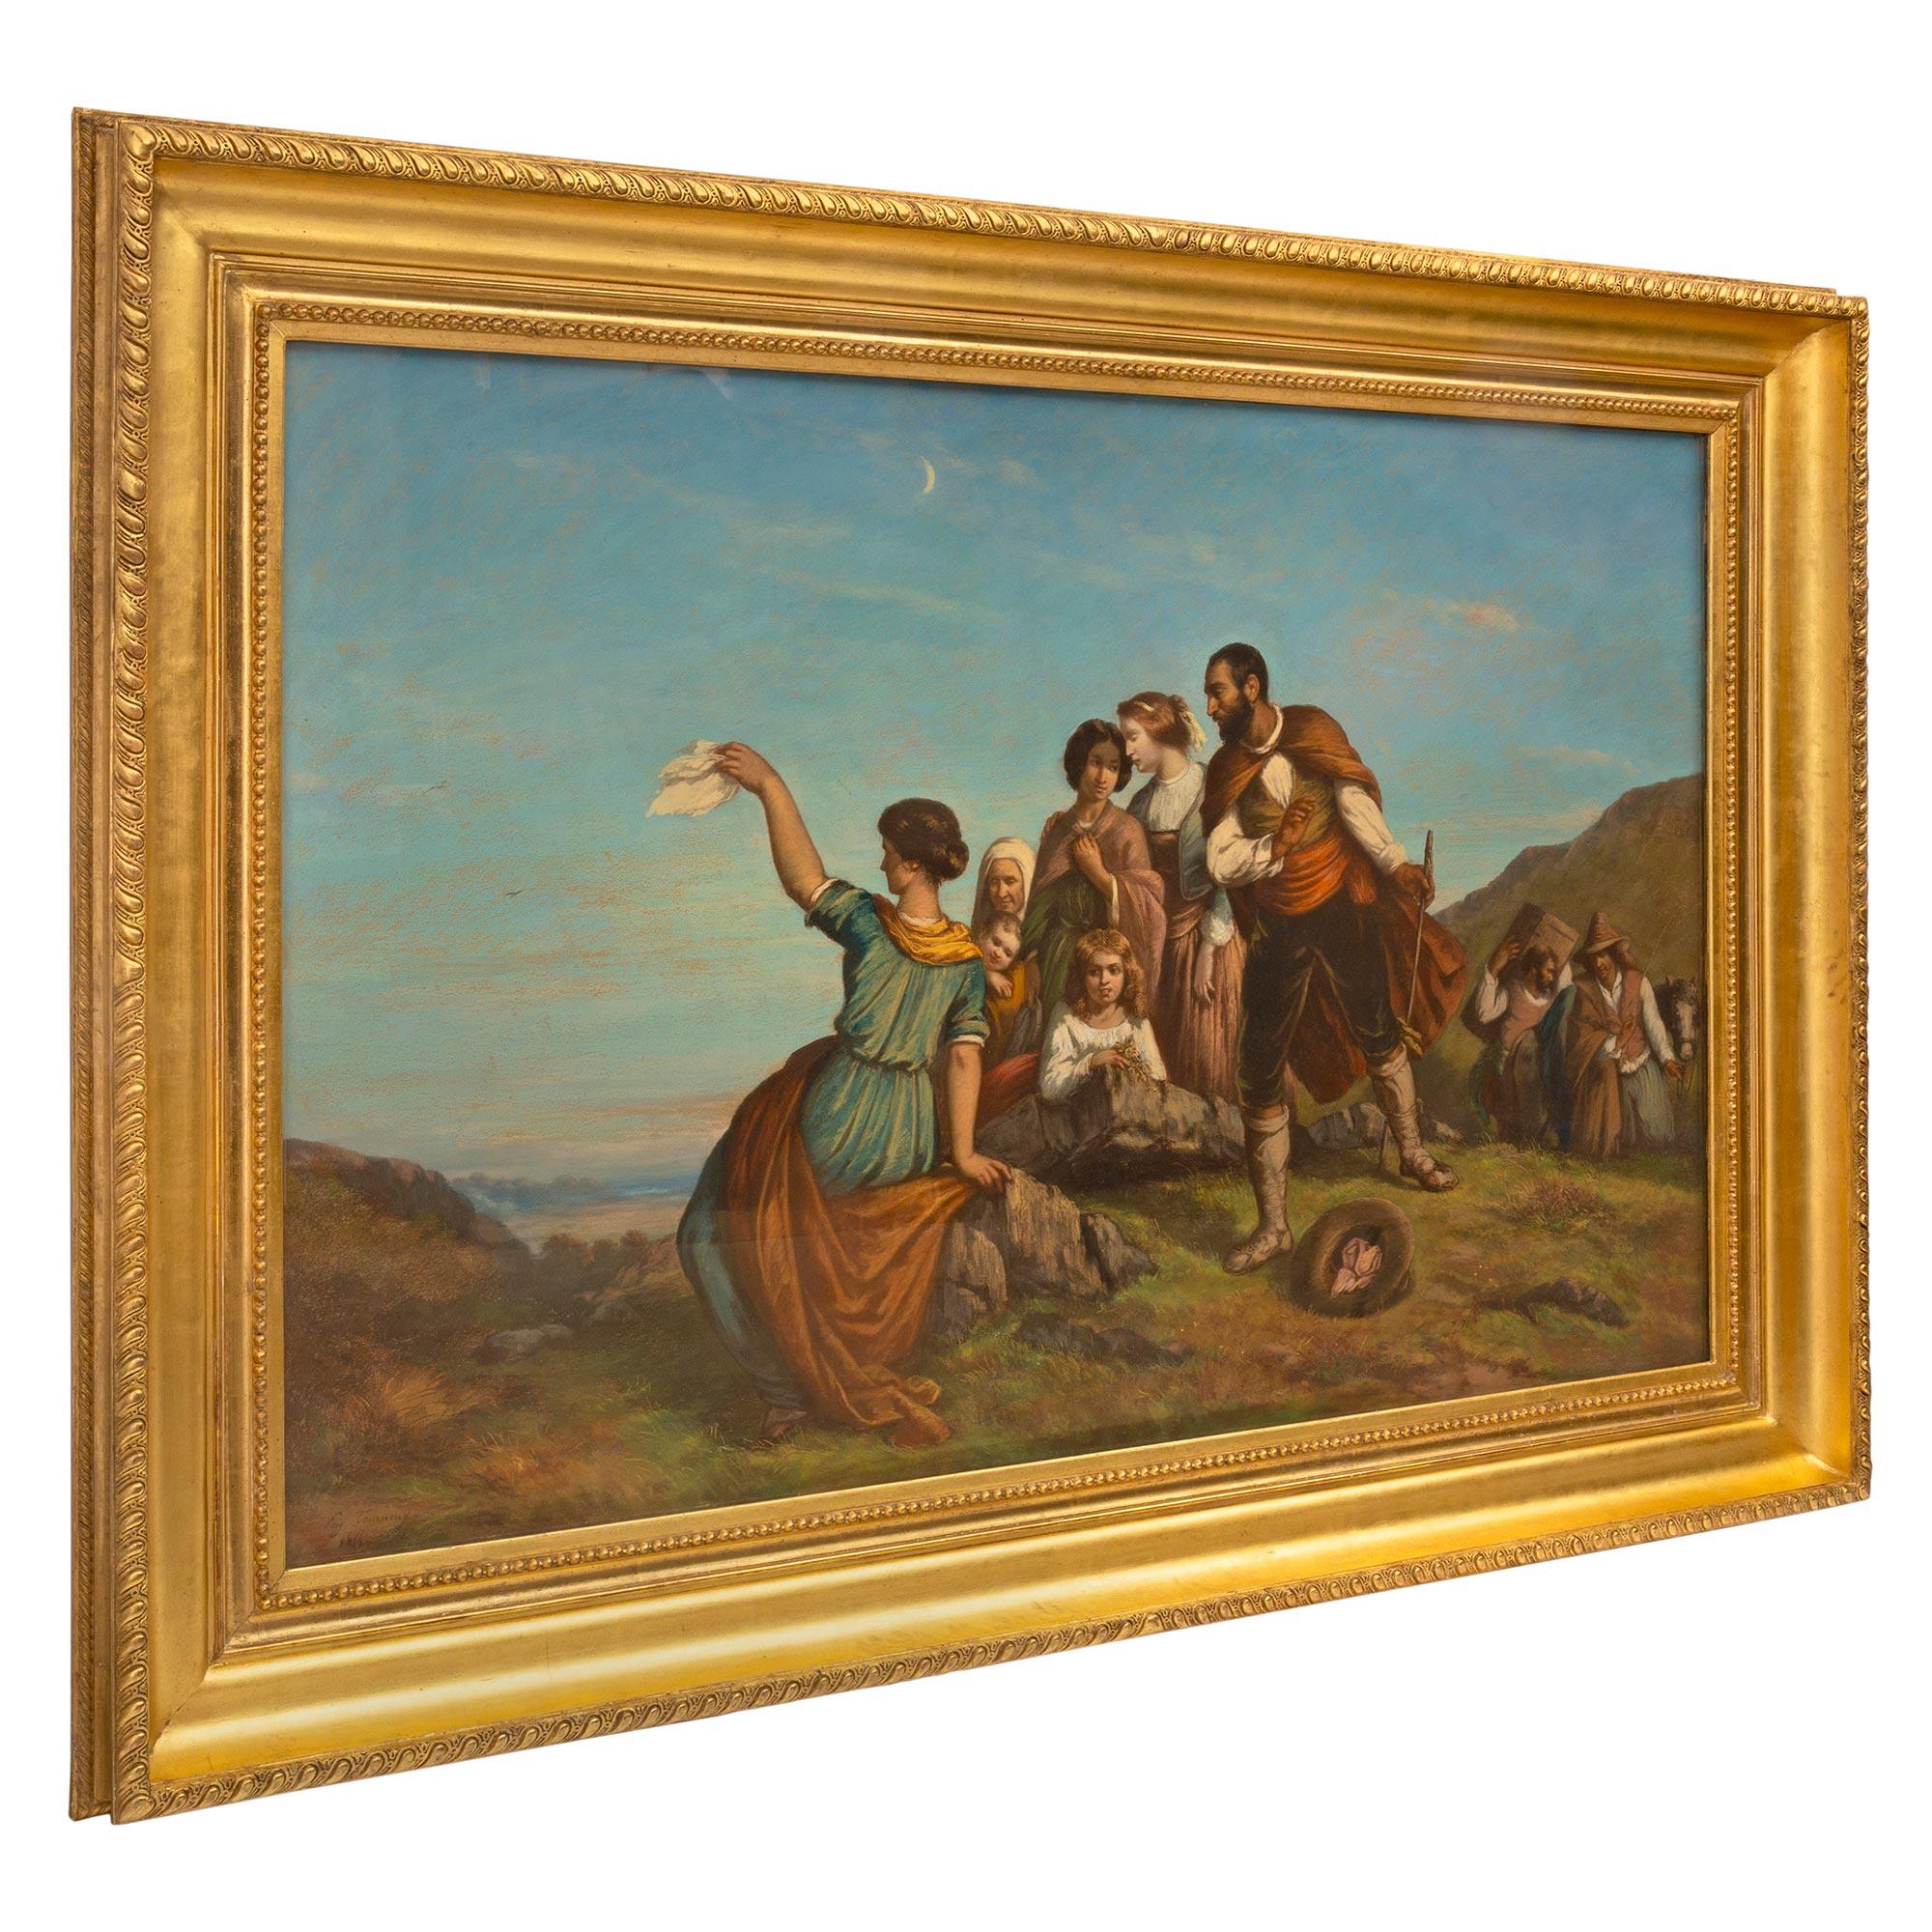 A most impressive and large scaled French 19th century pastel, signed E. Tourneux 1855. The wonderfully executed painting depicts a lovely hillside by the sea, with a group of personages dressed in colorful classical attire. They are standing at the